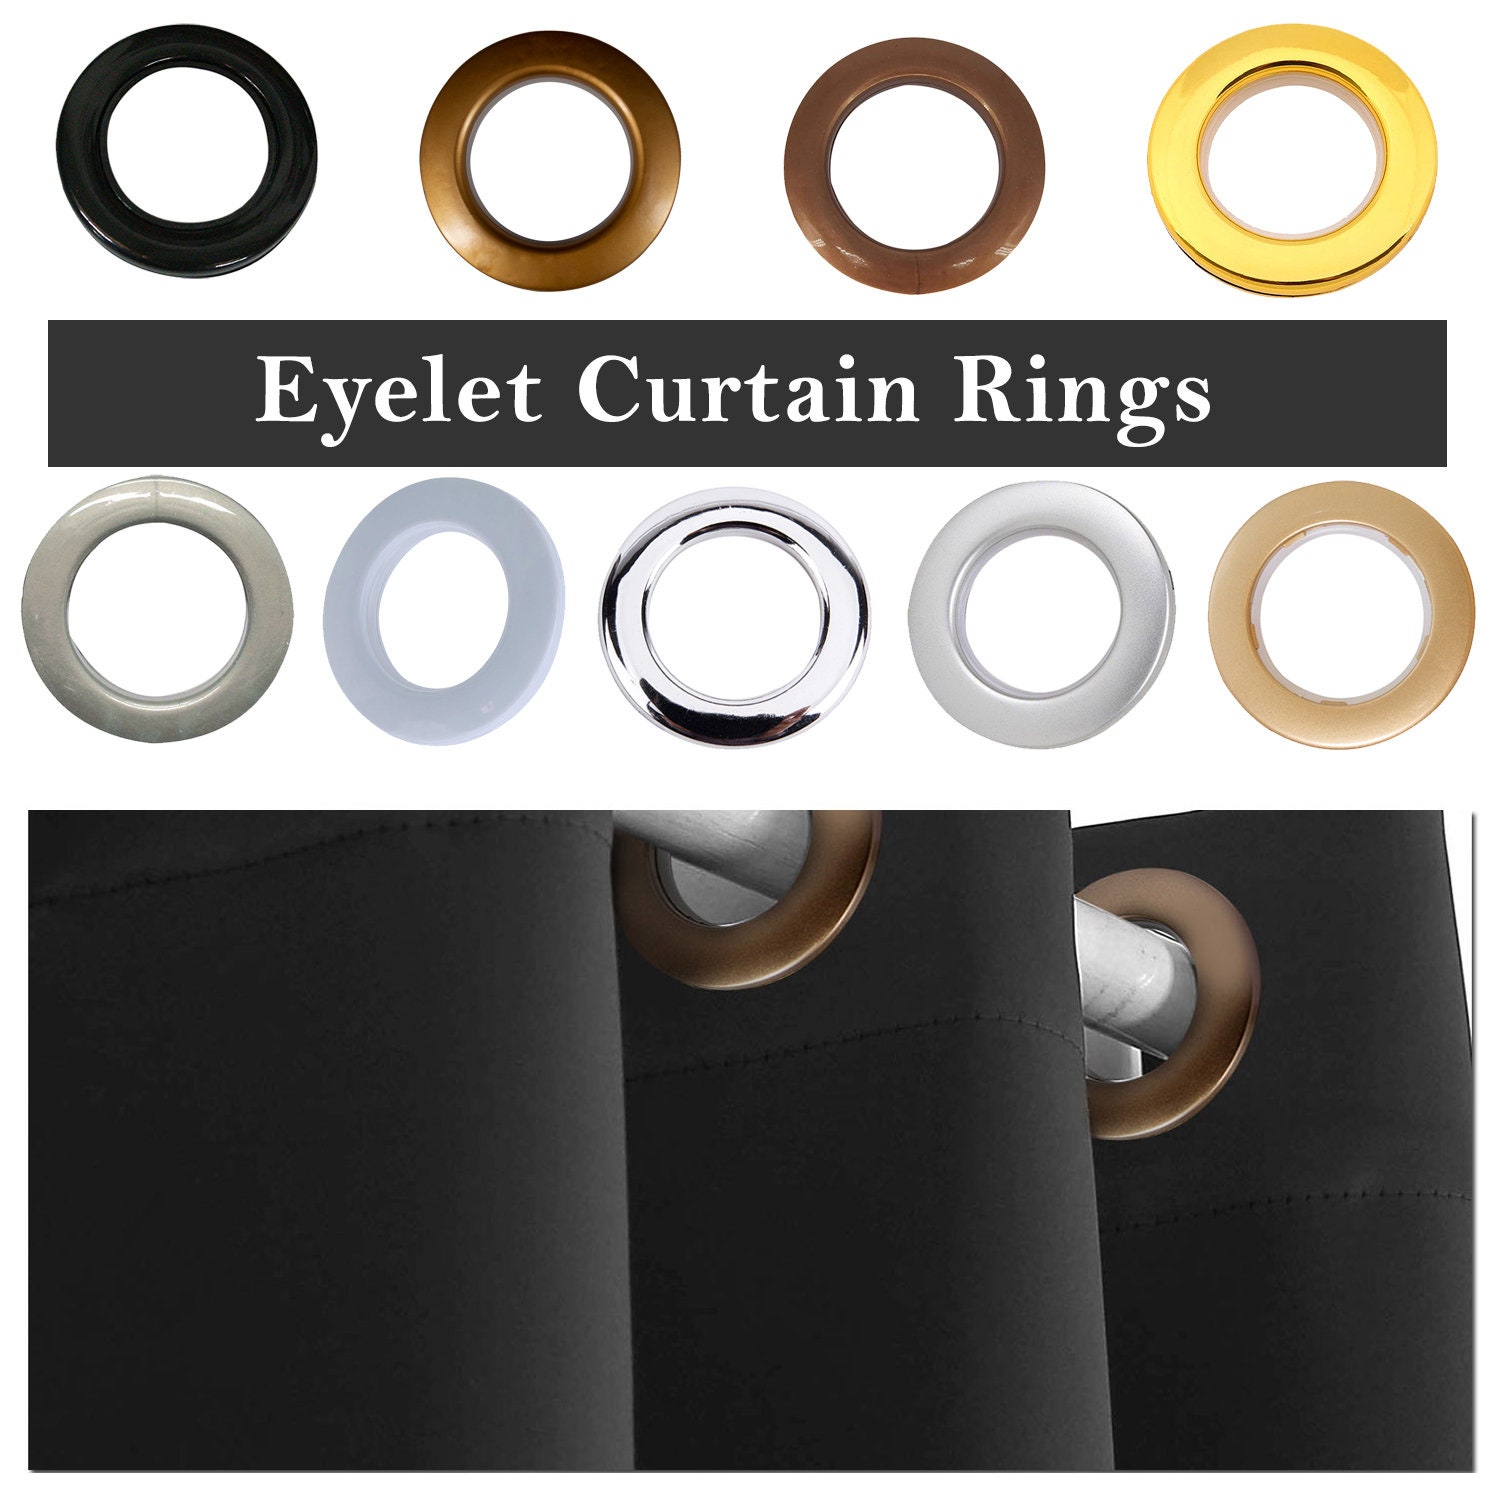 Buy FAPBADRI Curtain Eyelet Rings with Flexi Lock, Suitable for Any 1 inch  Curtain Rod - Copper Colour - 20 Pieces Online at Low Prices in India -  Amazon.in